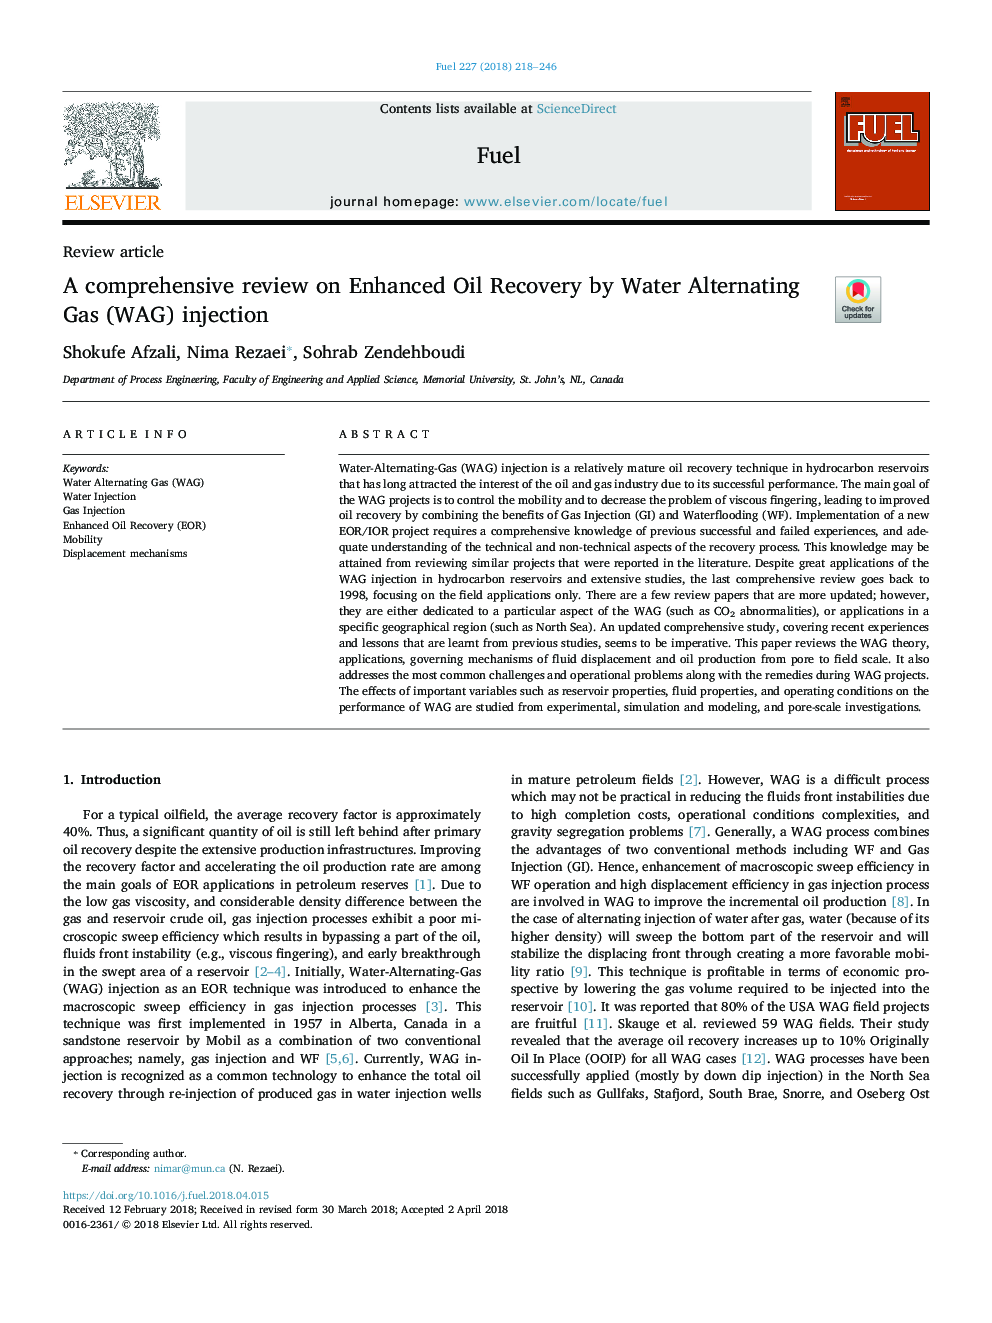 A comprehensive review on Enhanced Oil Recovery by Water Alternating Gas (WAG) injection